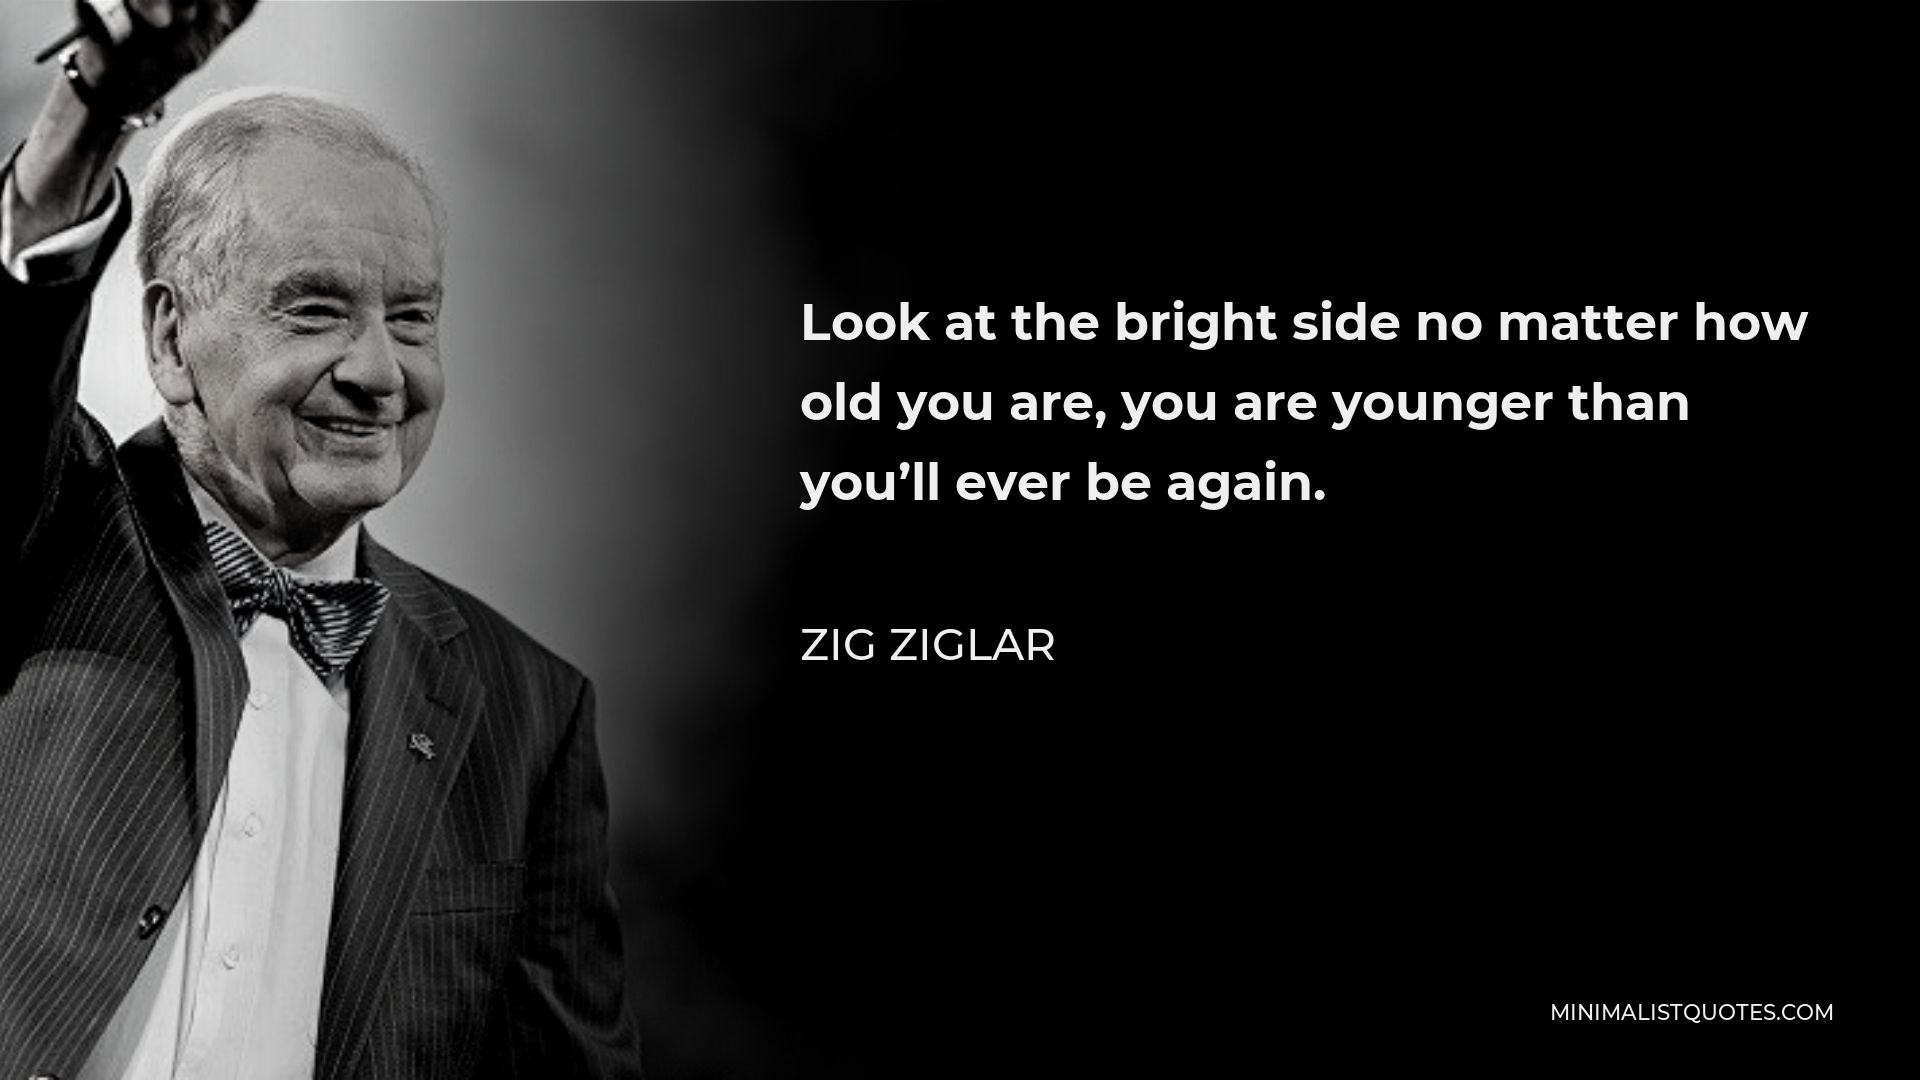 Zig Ziglar Quote - Look at the bright side no matter how old you are, you are younger than you’ll ever be again.